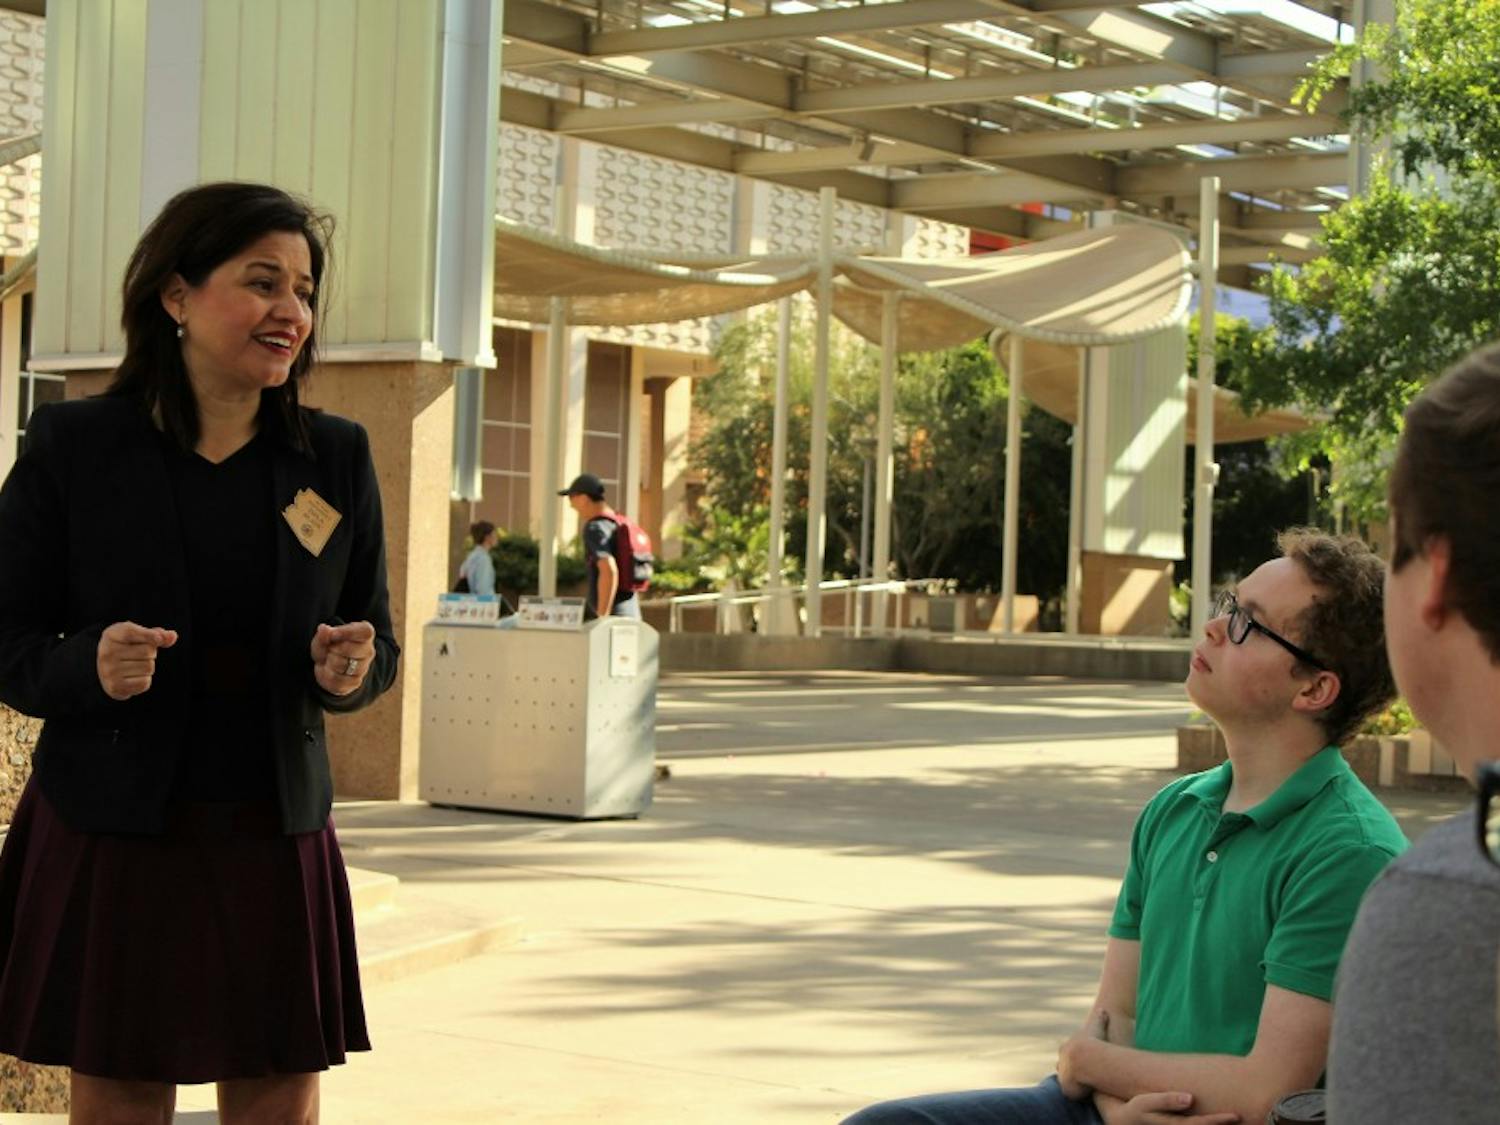 State Rep. Isela Blanc (D-Tempe) speaks with students in front of the Memorial Union building&nbsp;on March 31, 2017.